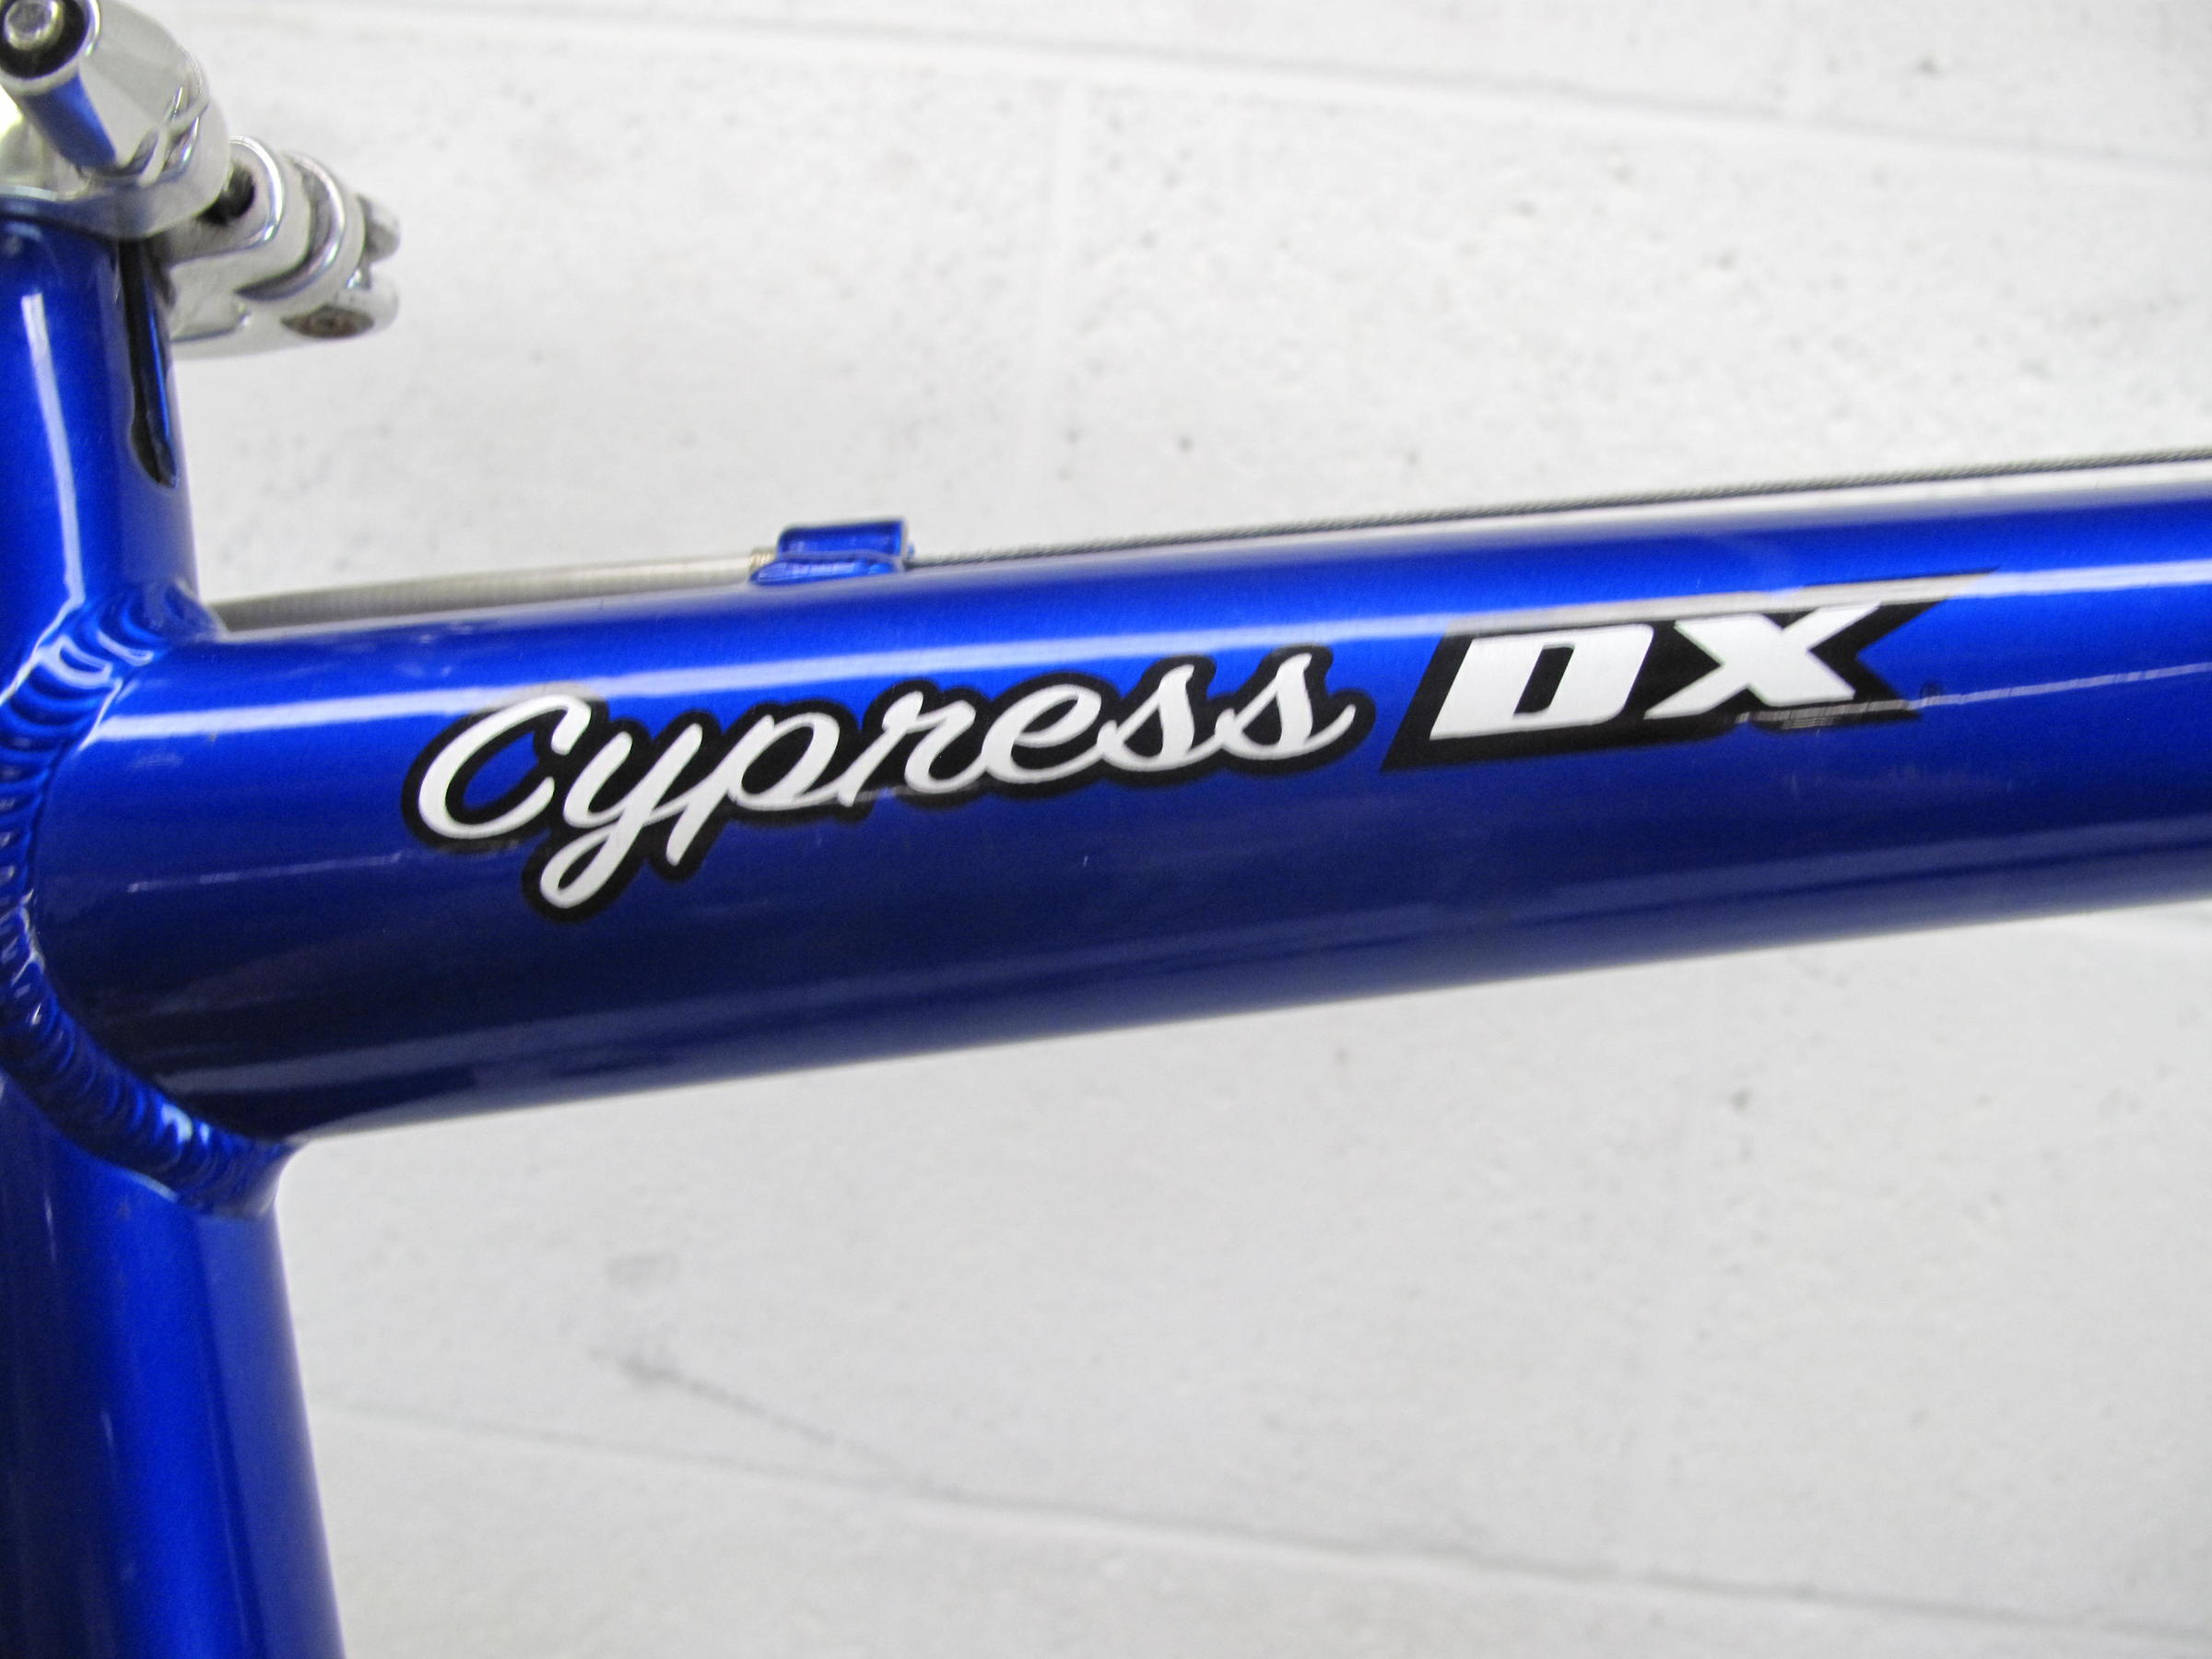 giant cypress dx review